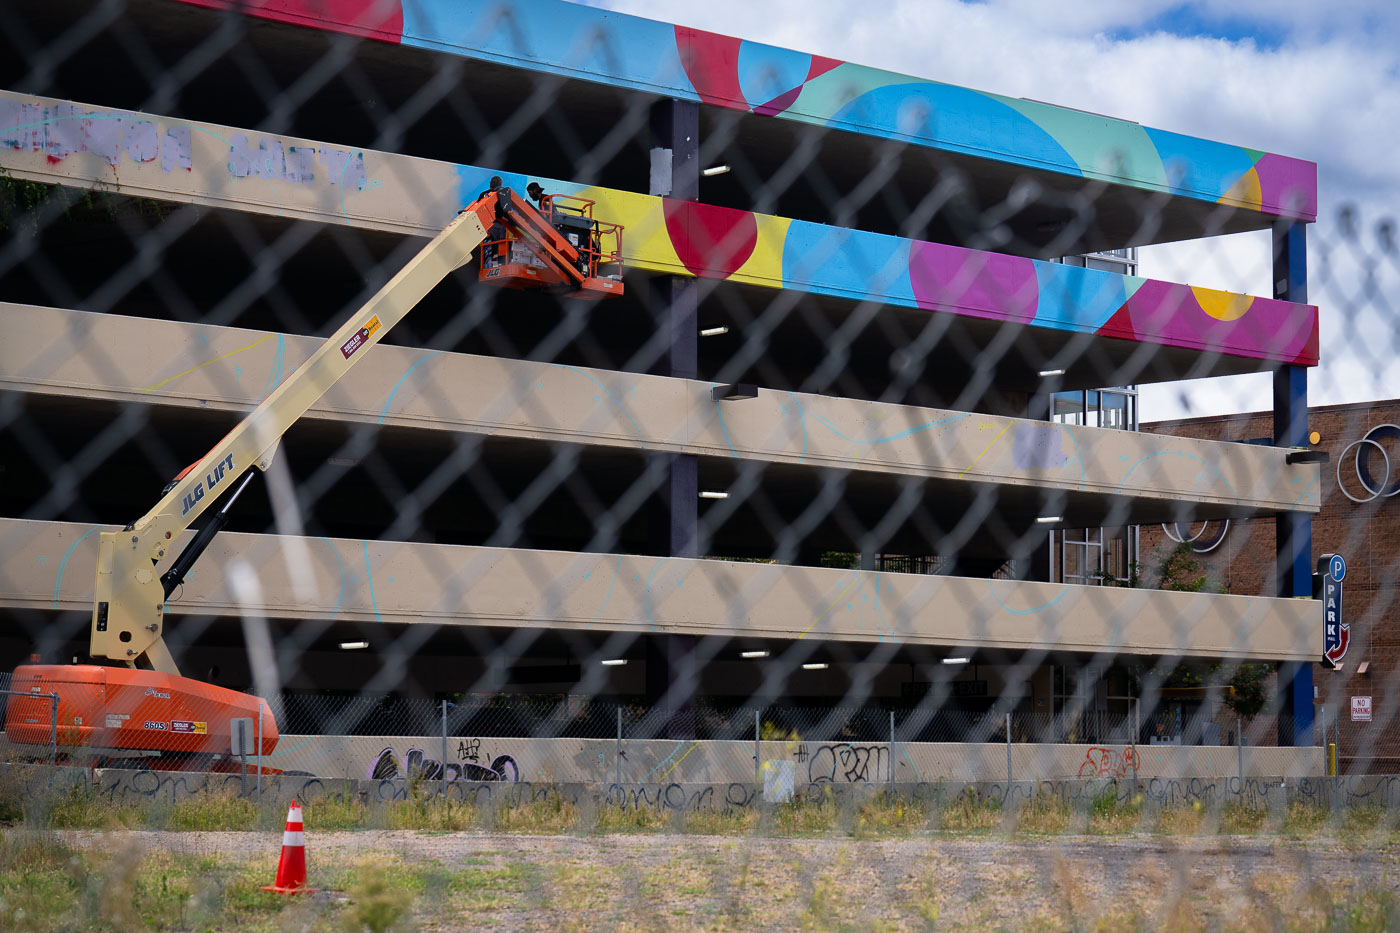 Lift being used to paint billboard on parking ramp